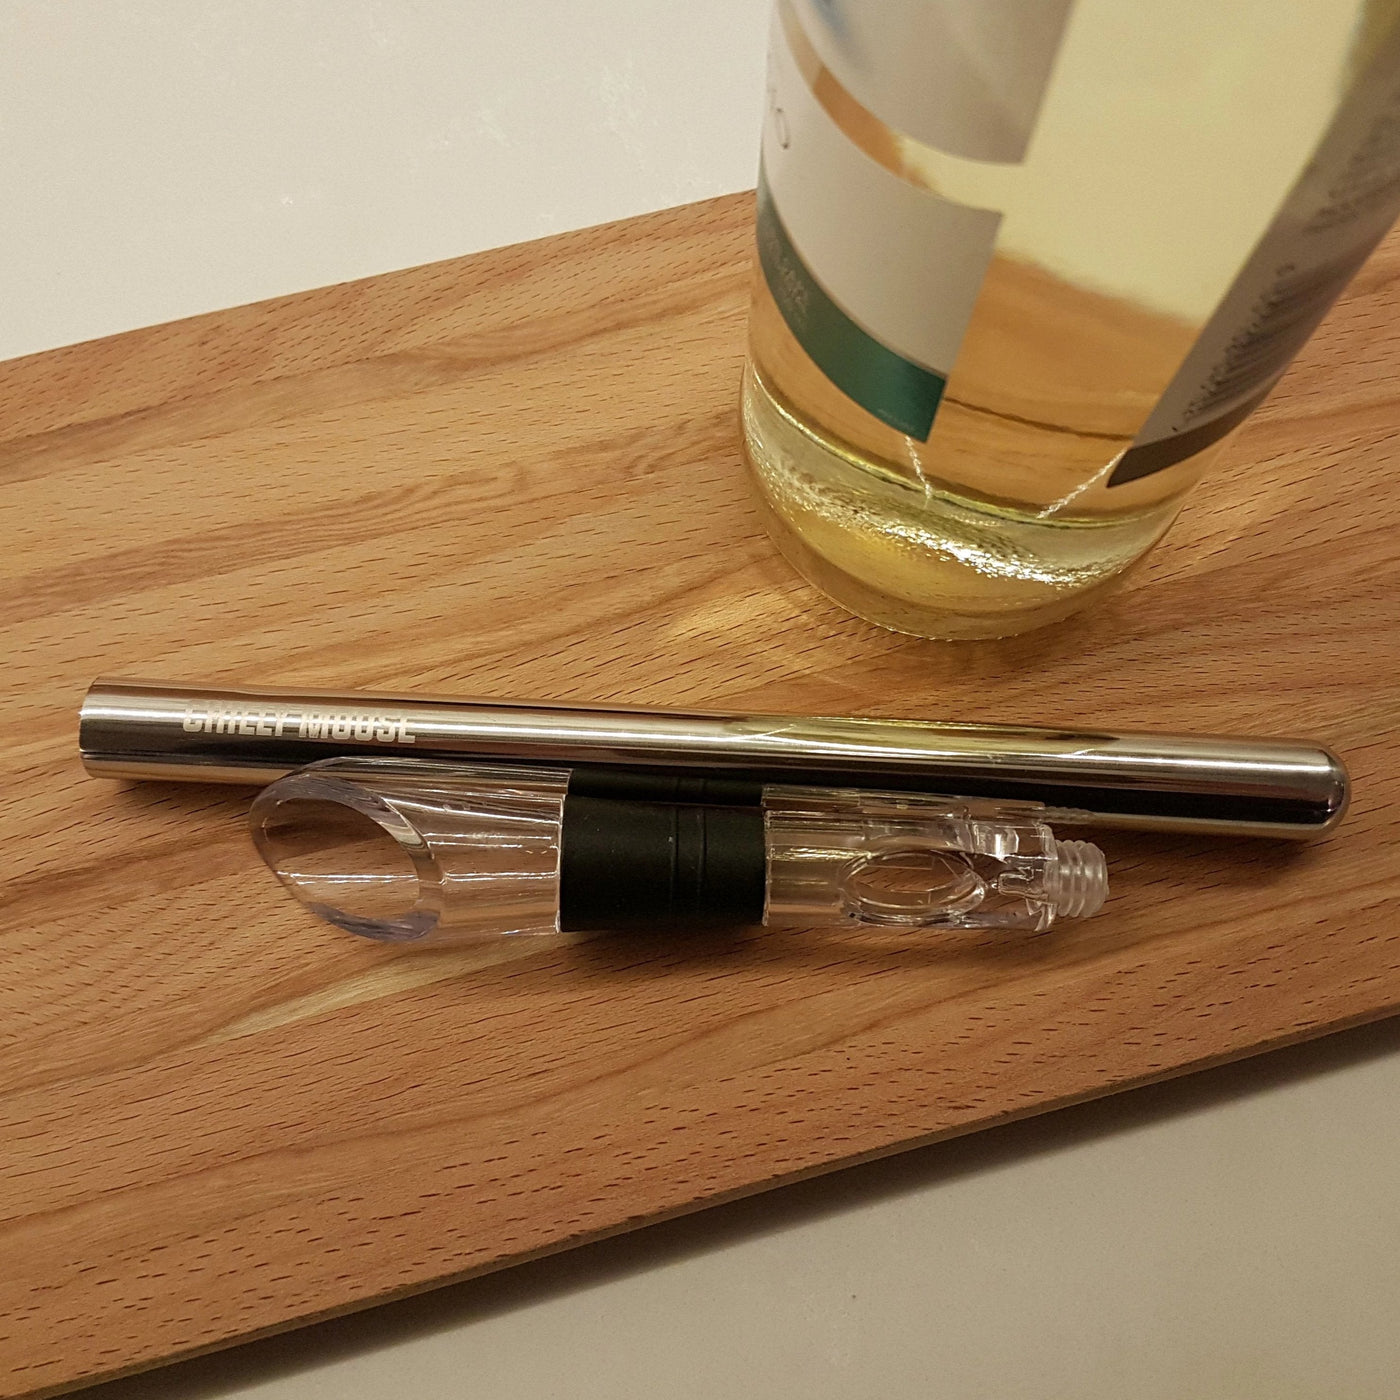 The Chilly Wine Icicle disassembled on a cutting board beside a bottle of white wine.